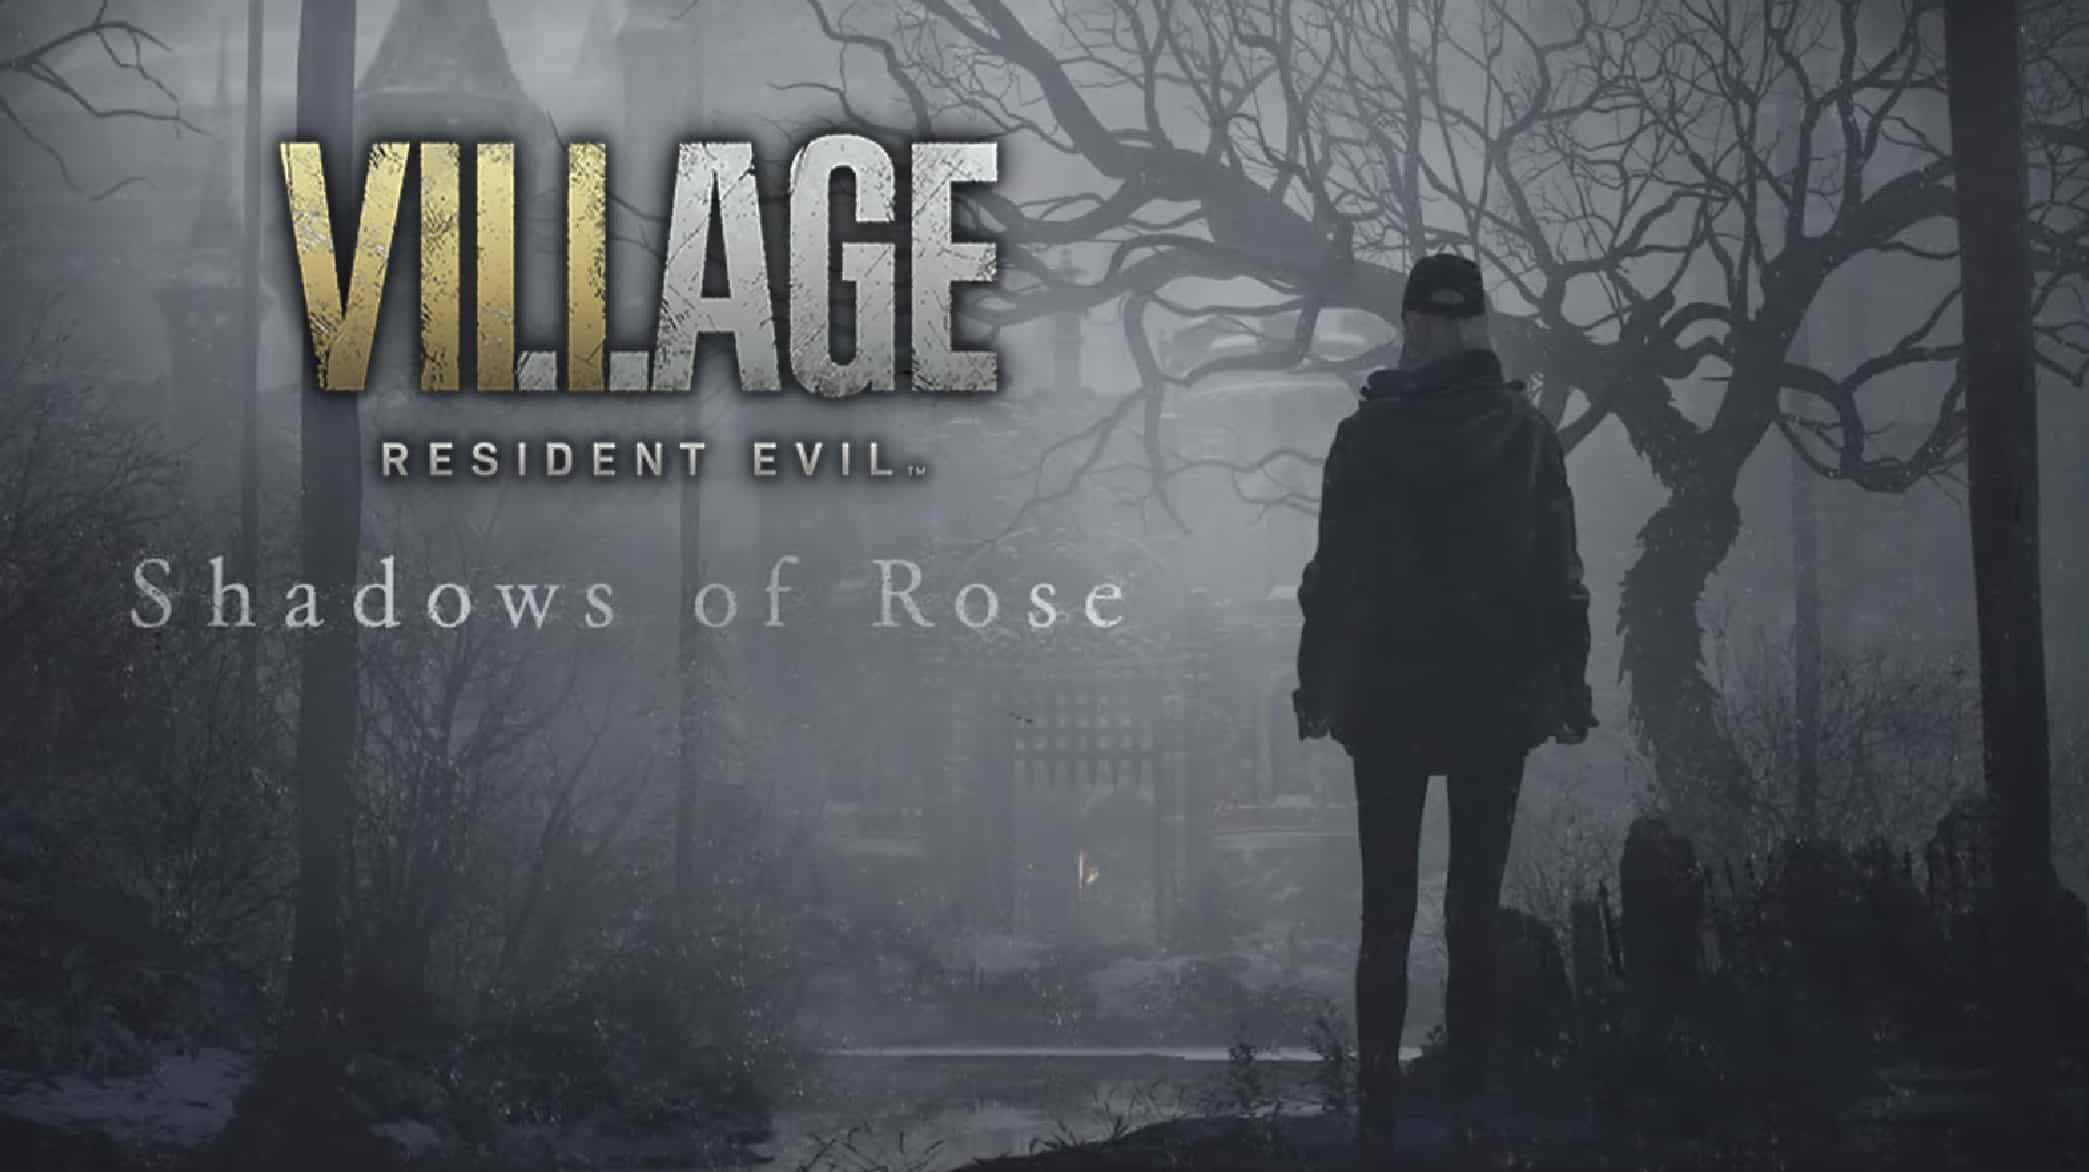 Resident Evil Village Release Date Falls in May 2021